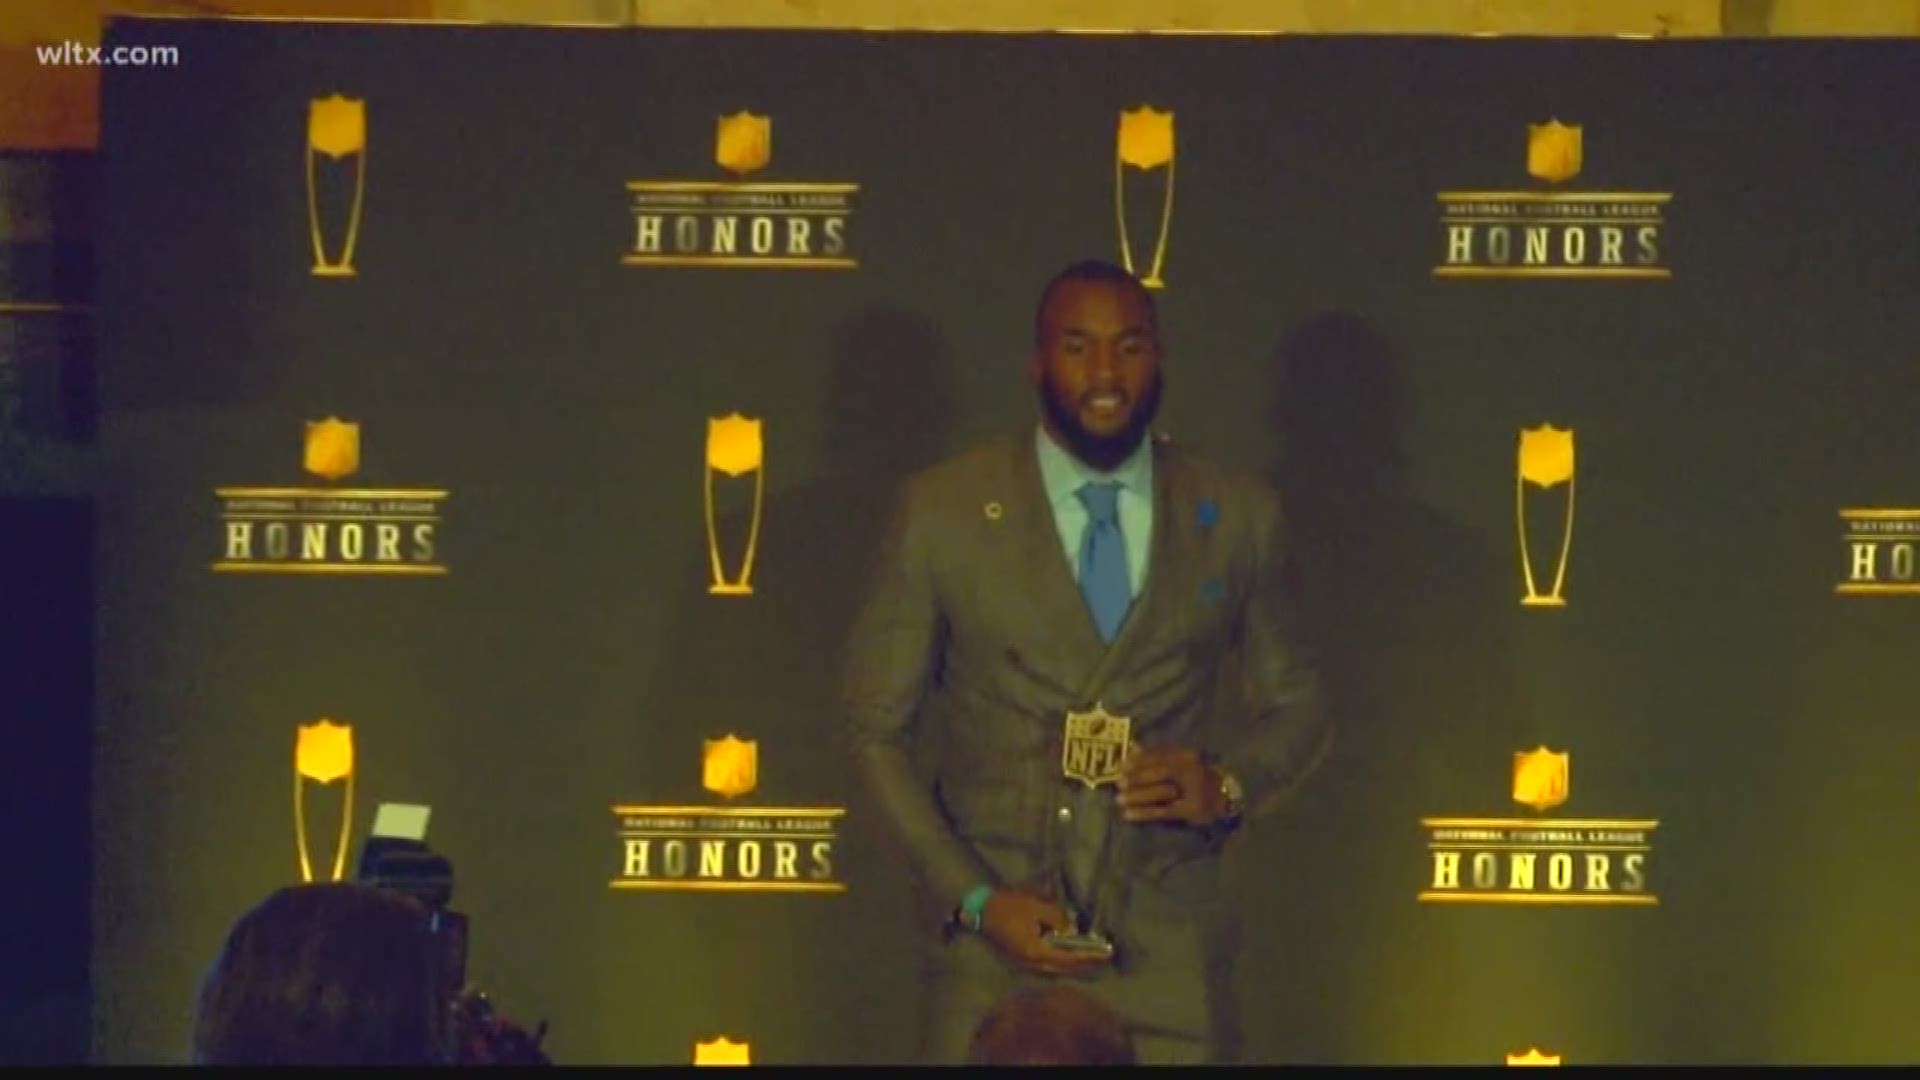 For the third straight year, Darius Leonard gets some major hardware. The former S.C. State linebacker who left school with back-to-back MEAC Defensive Player of the Year awards has another one in his first season in the NFL.